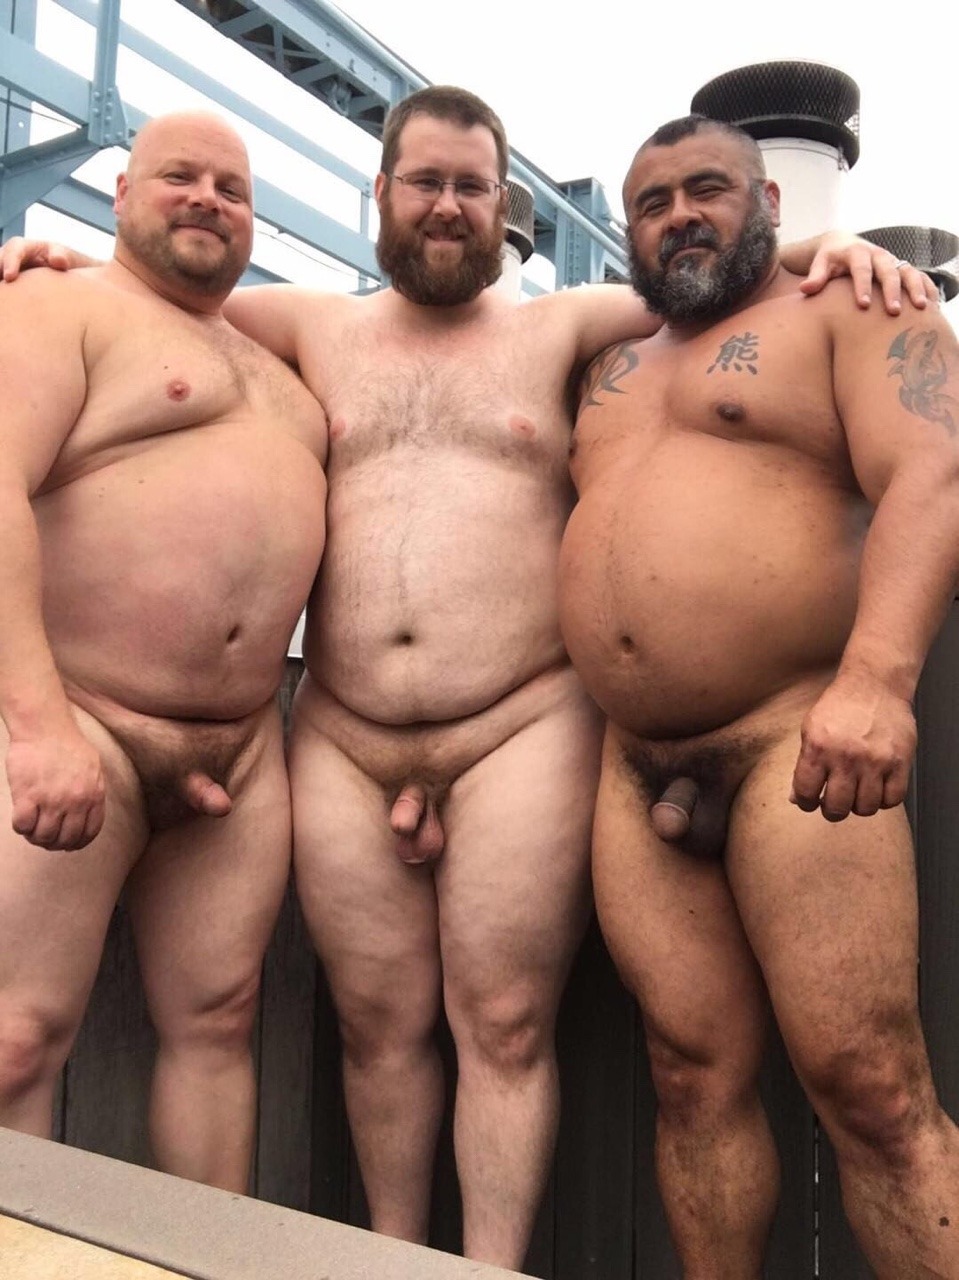 Fat guys gangbang small guy - free nude pictures, naked, photos, Fat dudes ...